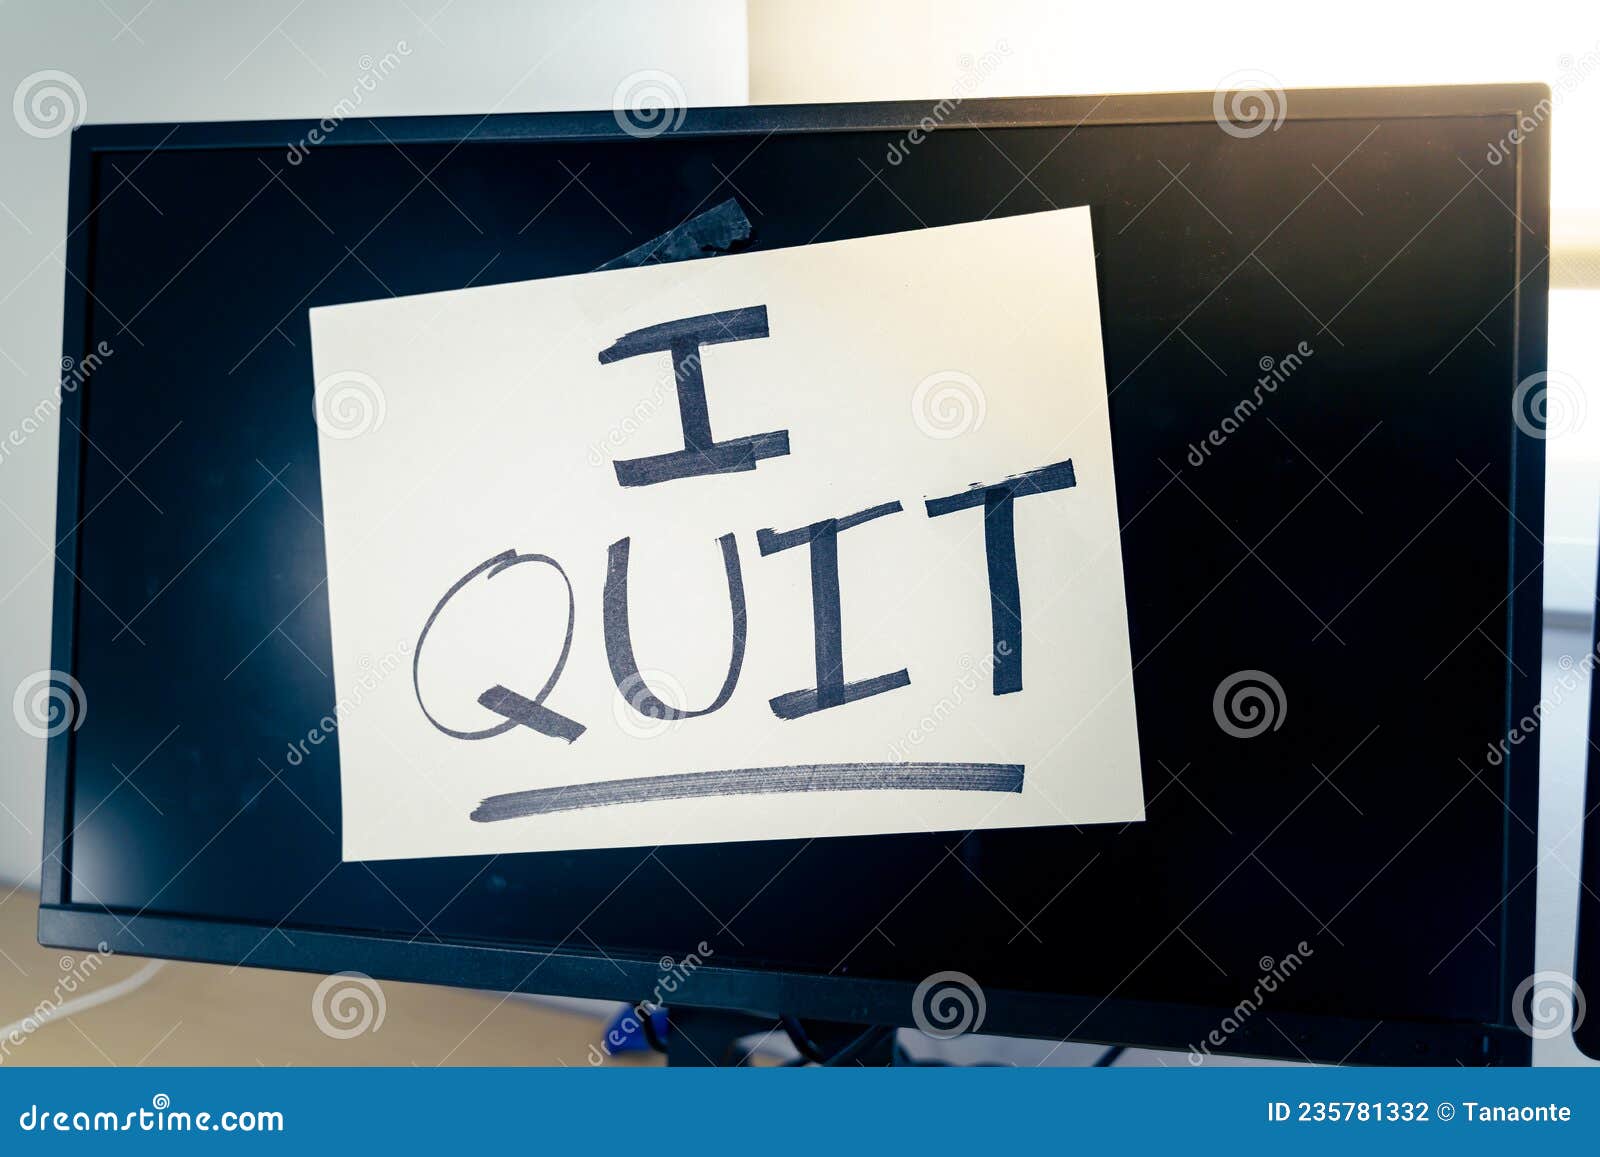 note on a monitor of a work computer with the text i quit. great resignation concept